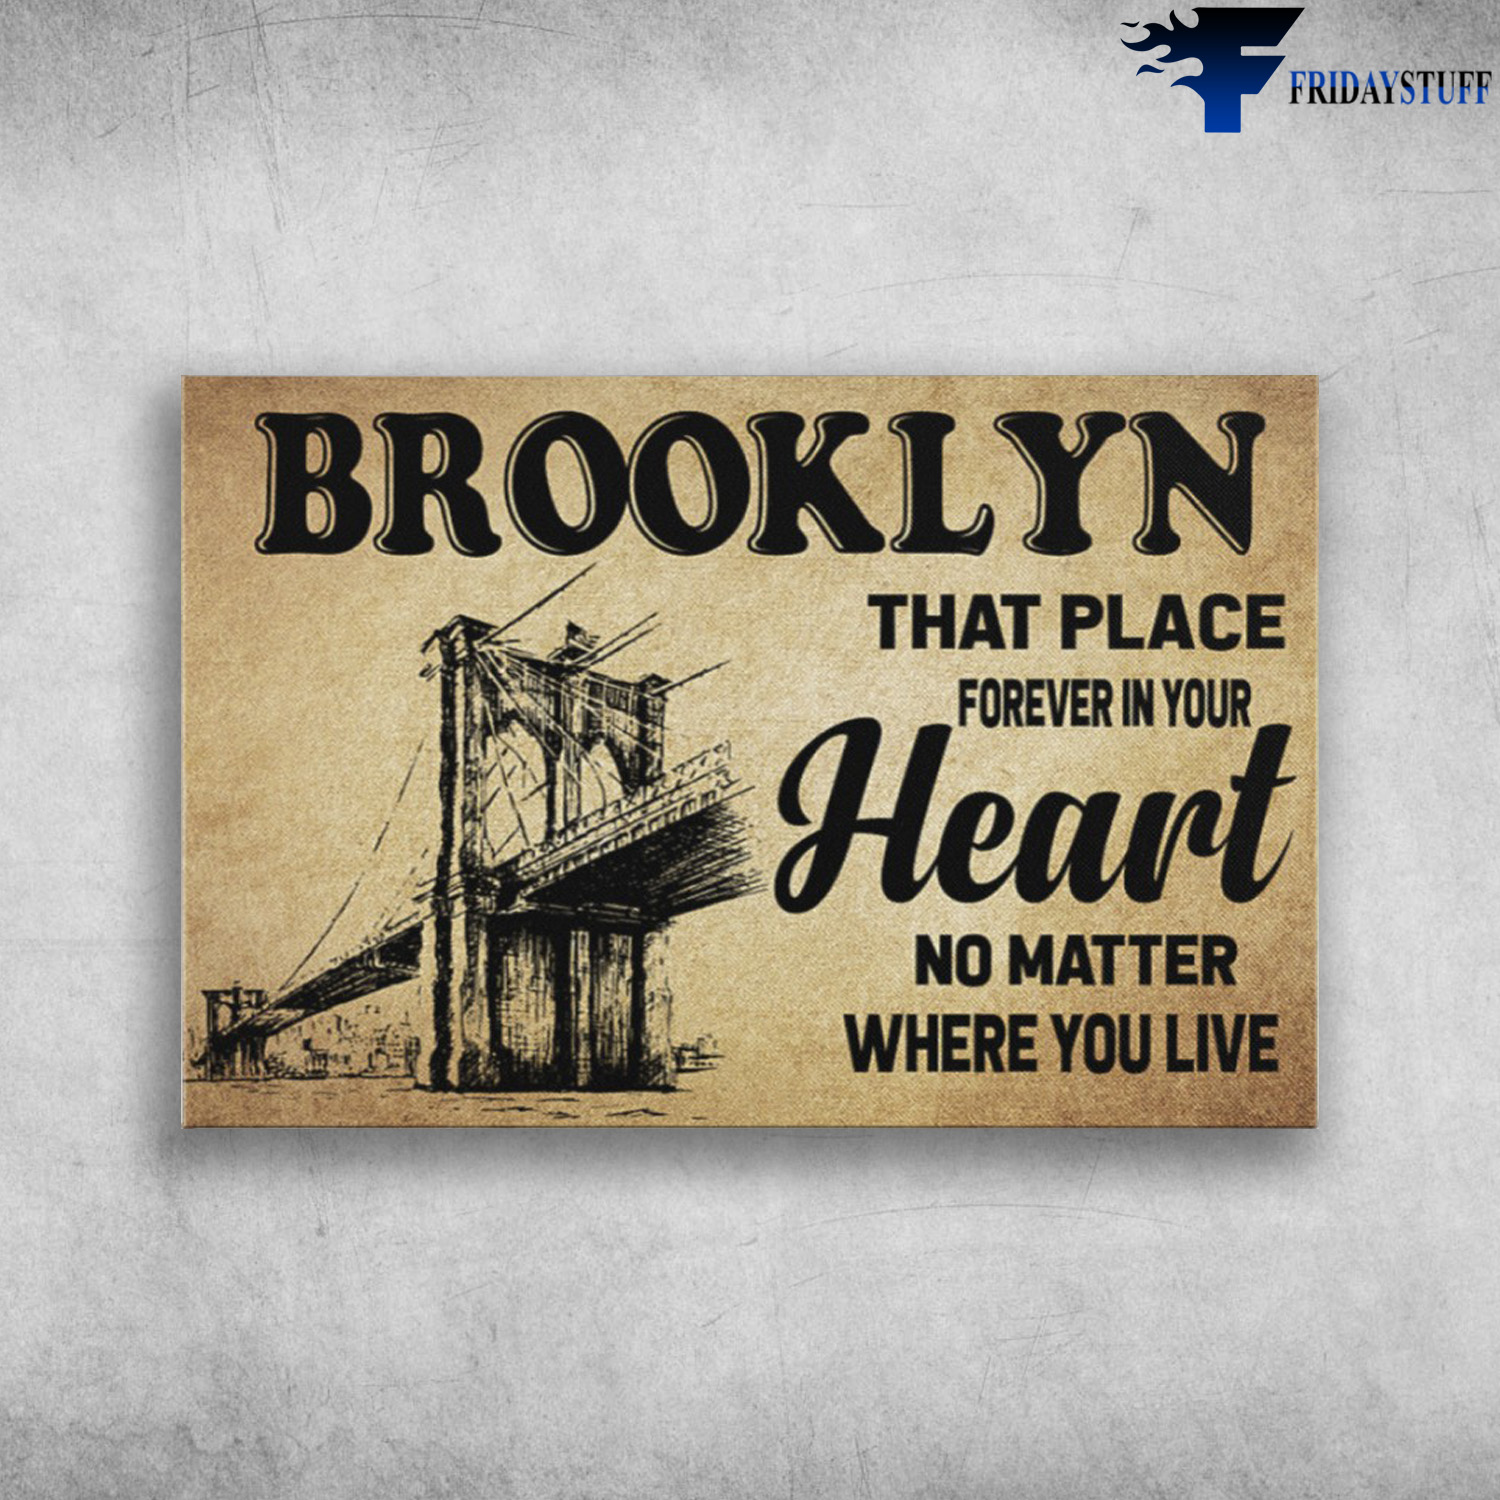 Brooklyn Bridge - That Place Forever In Your Heart, No Matter Where You Live